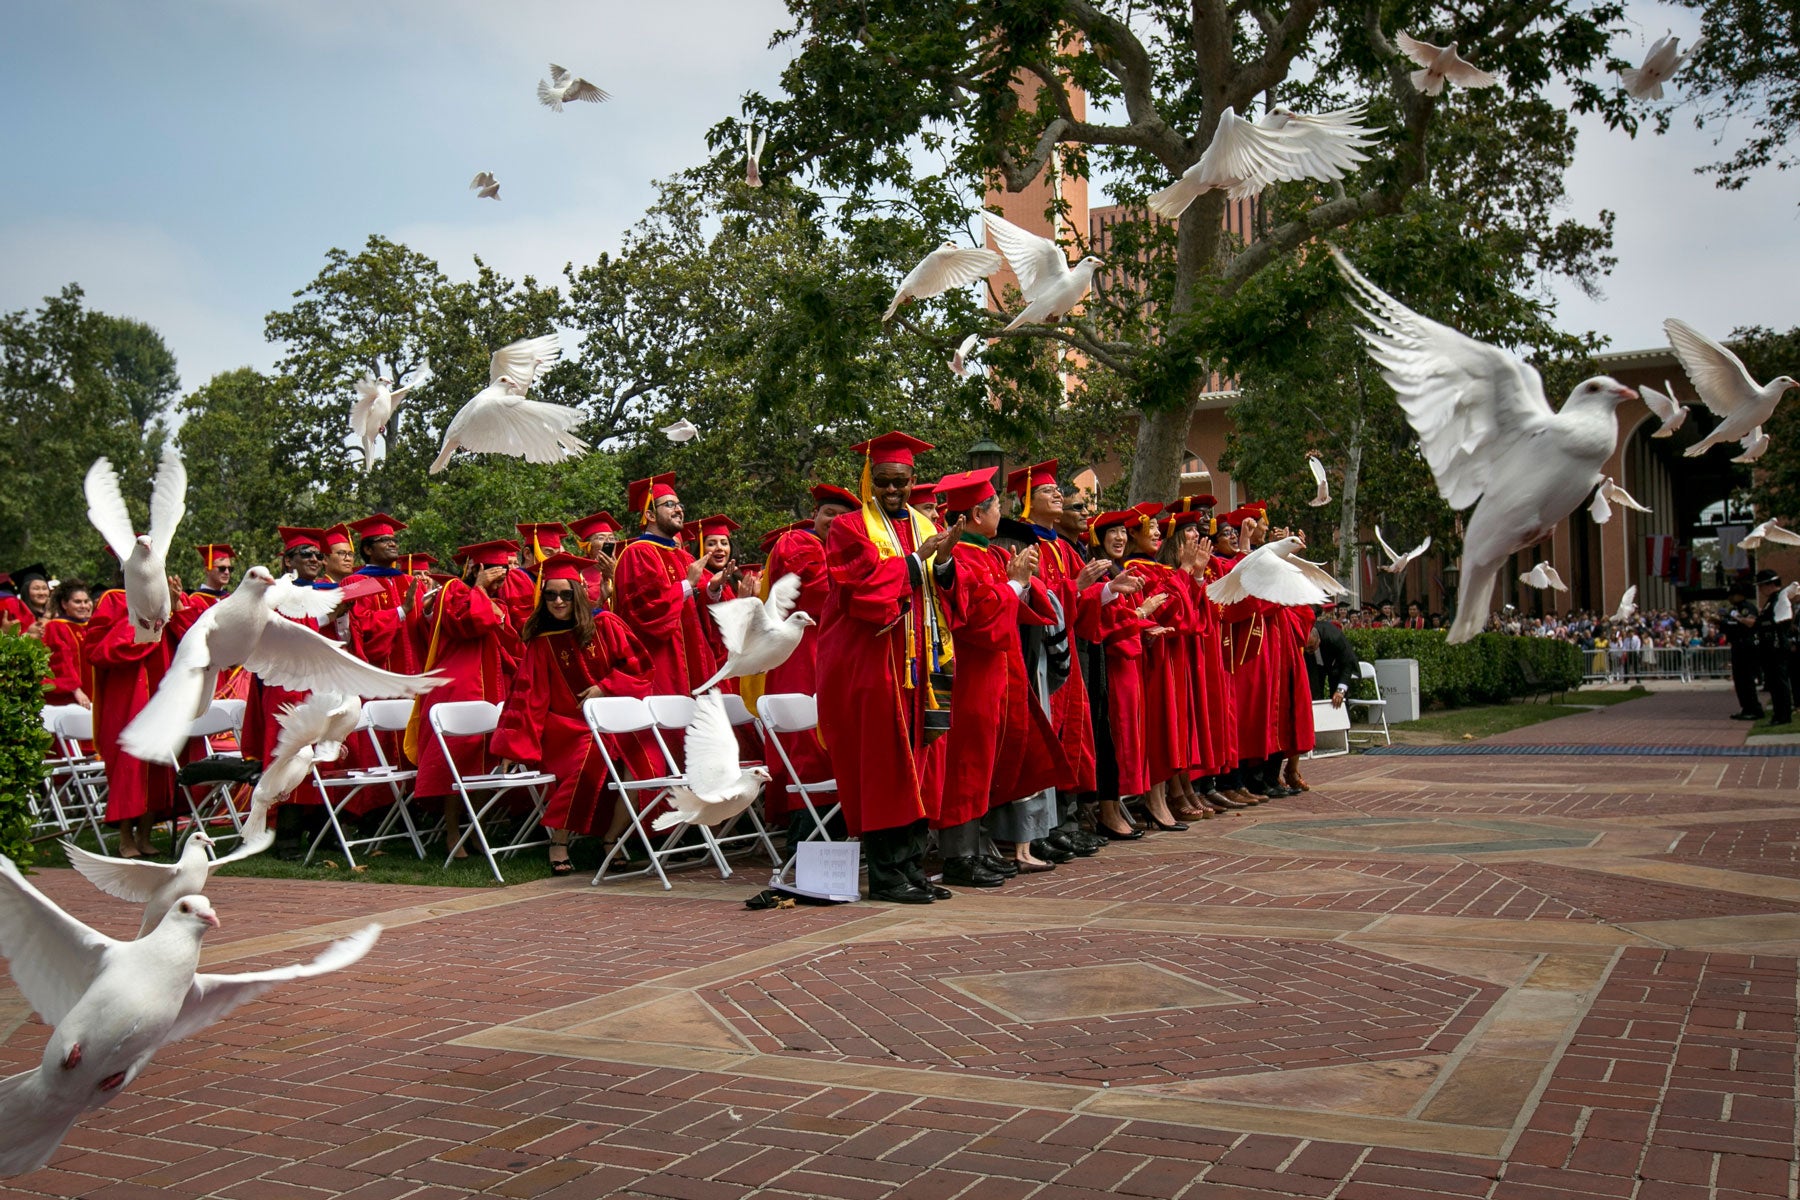 Doves at commencement